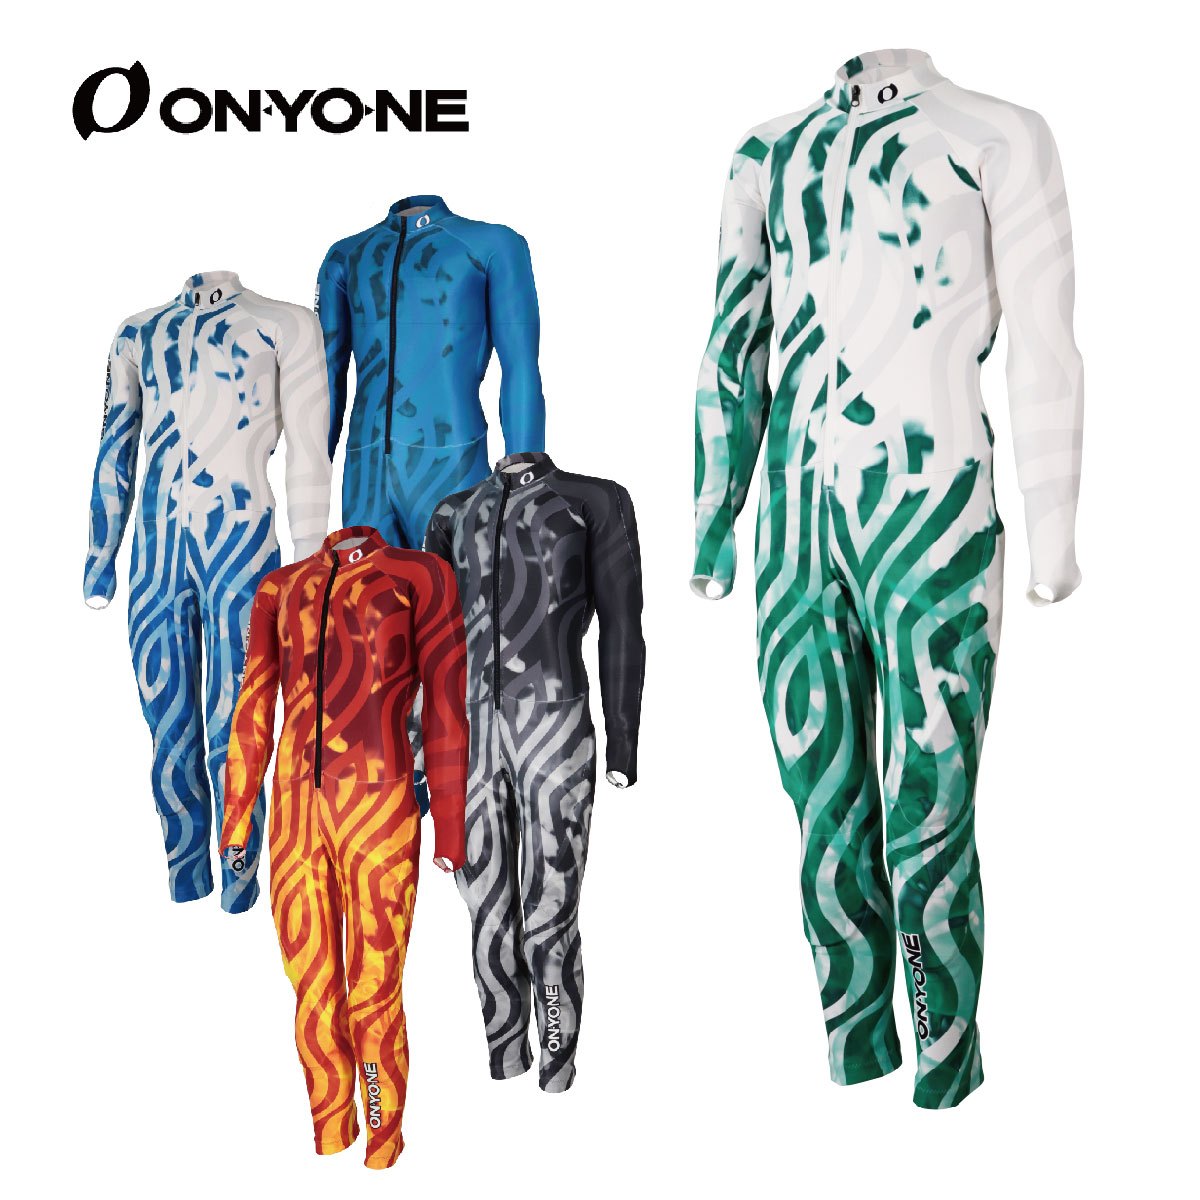 Race Suit - Ski Gear and Japanese Traditional Product - World